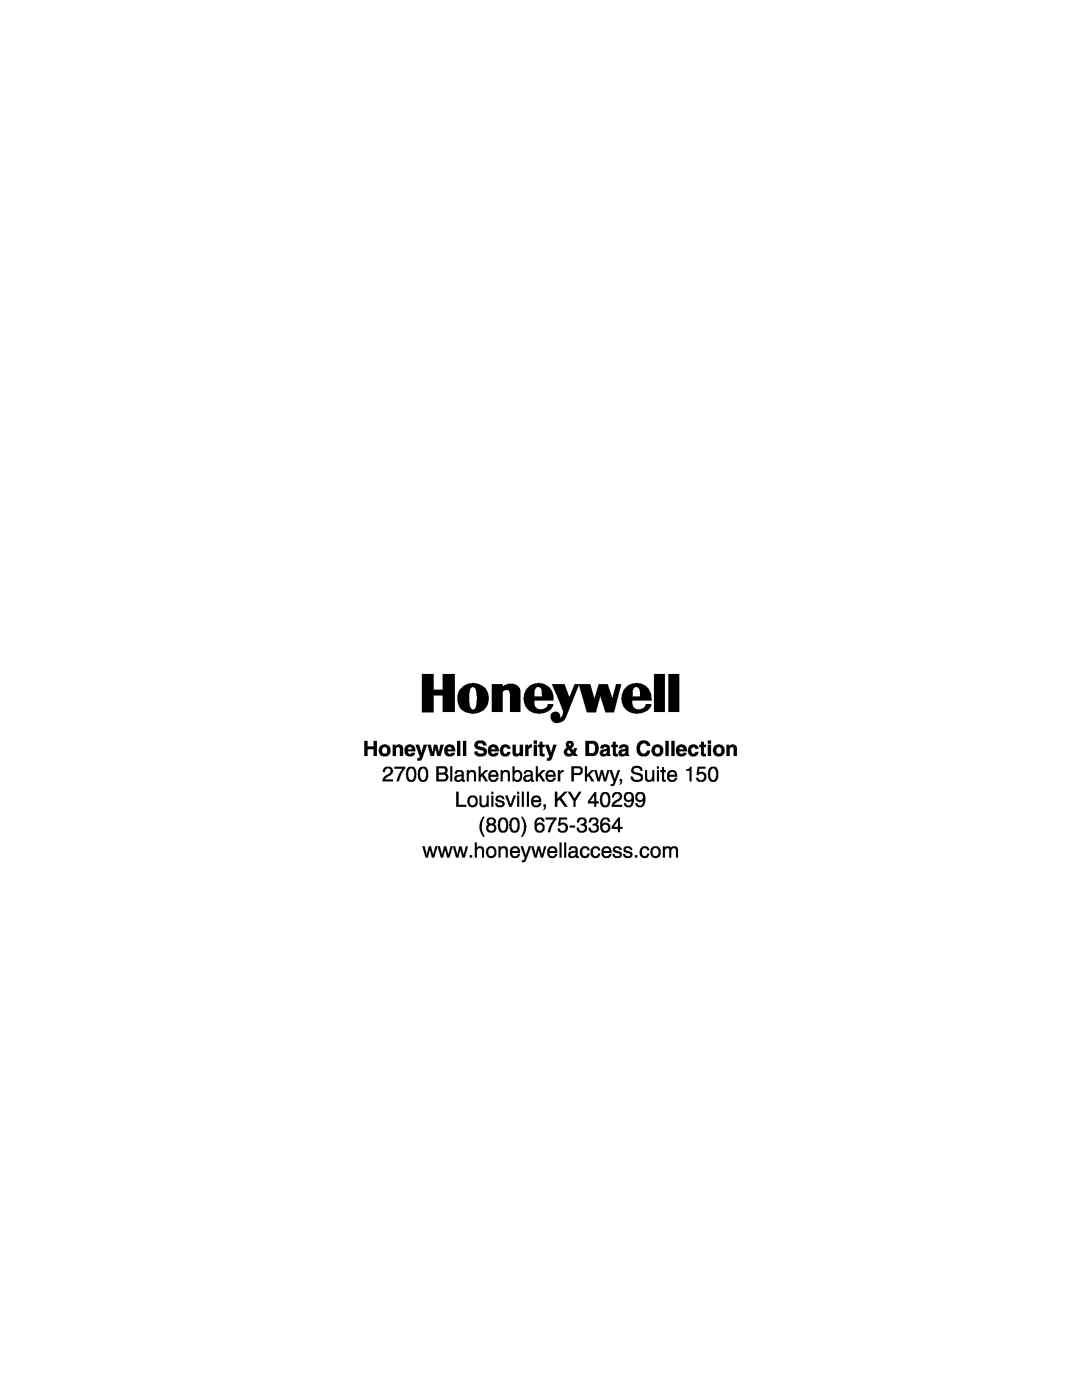 Honeywell PRO-2200 installation manual Honeywell Security & Data Collection, Blankenbaker Pkwy, Suite Louisville, KY 